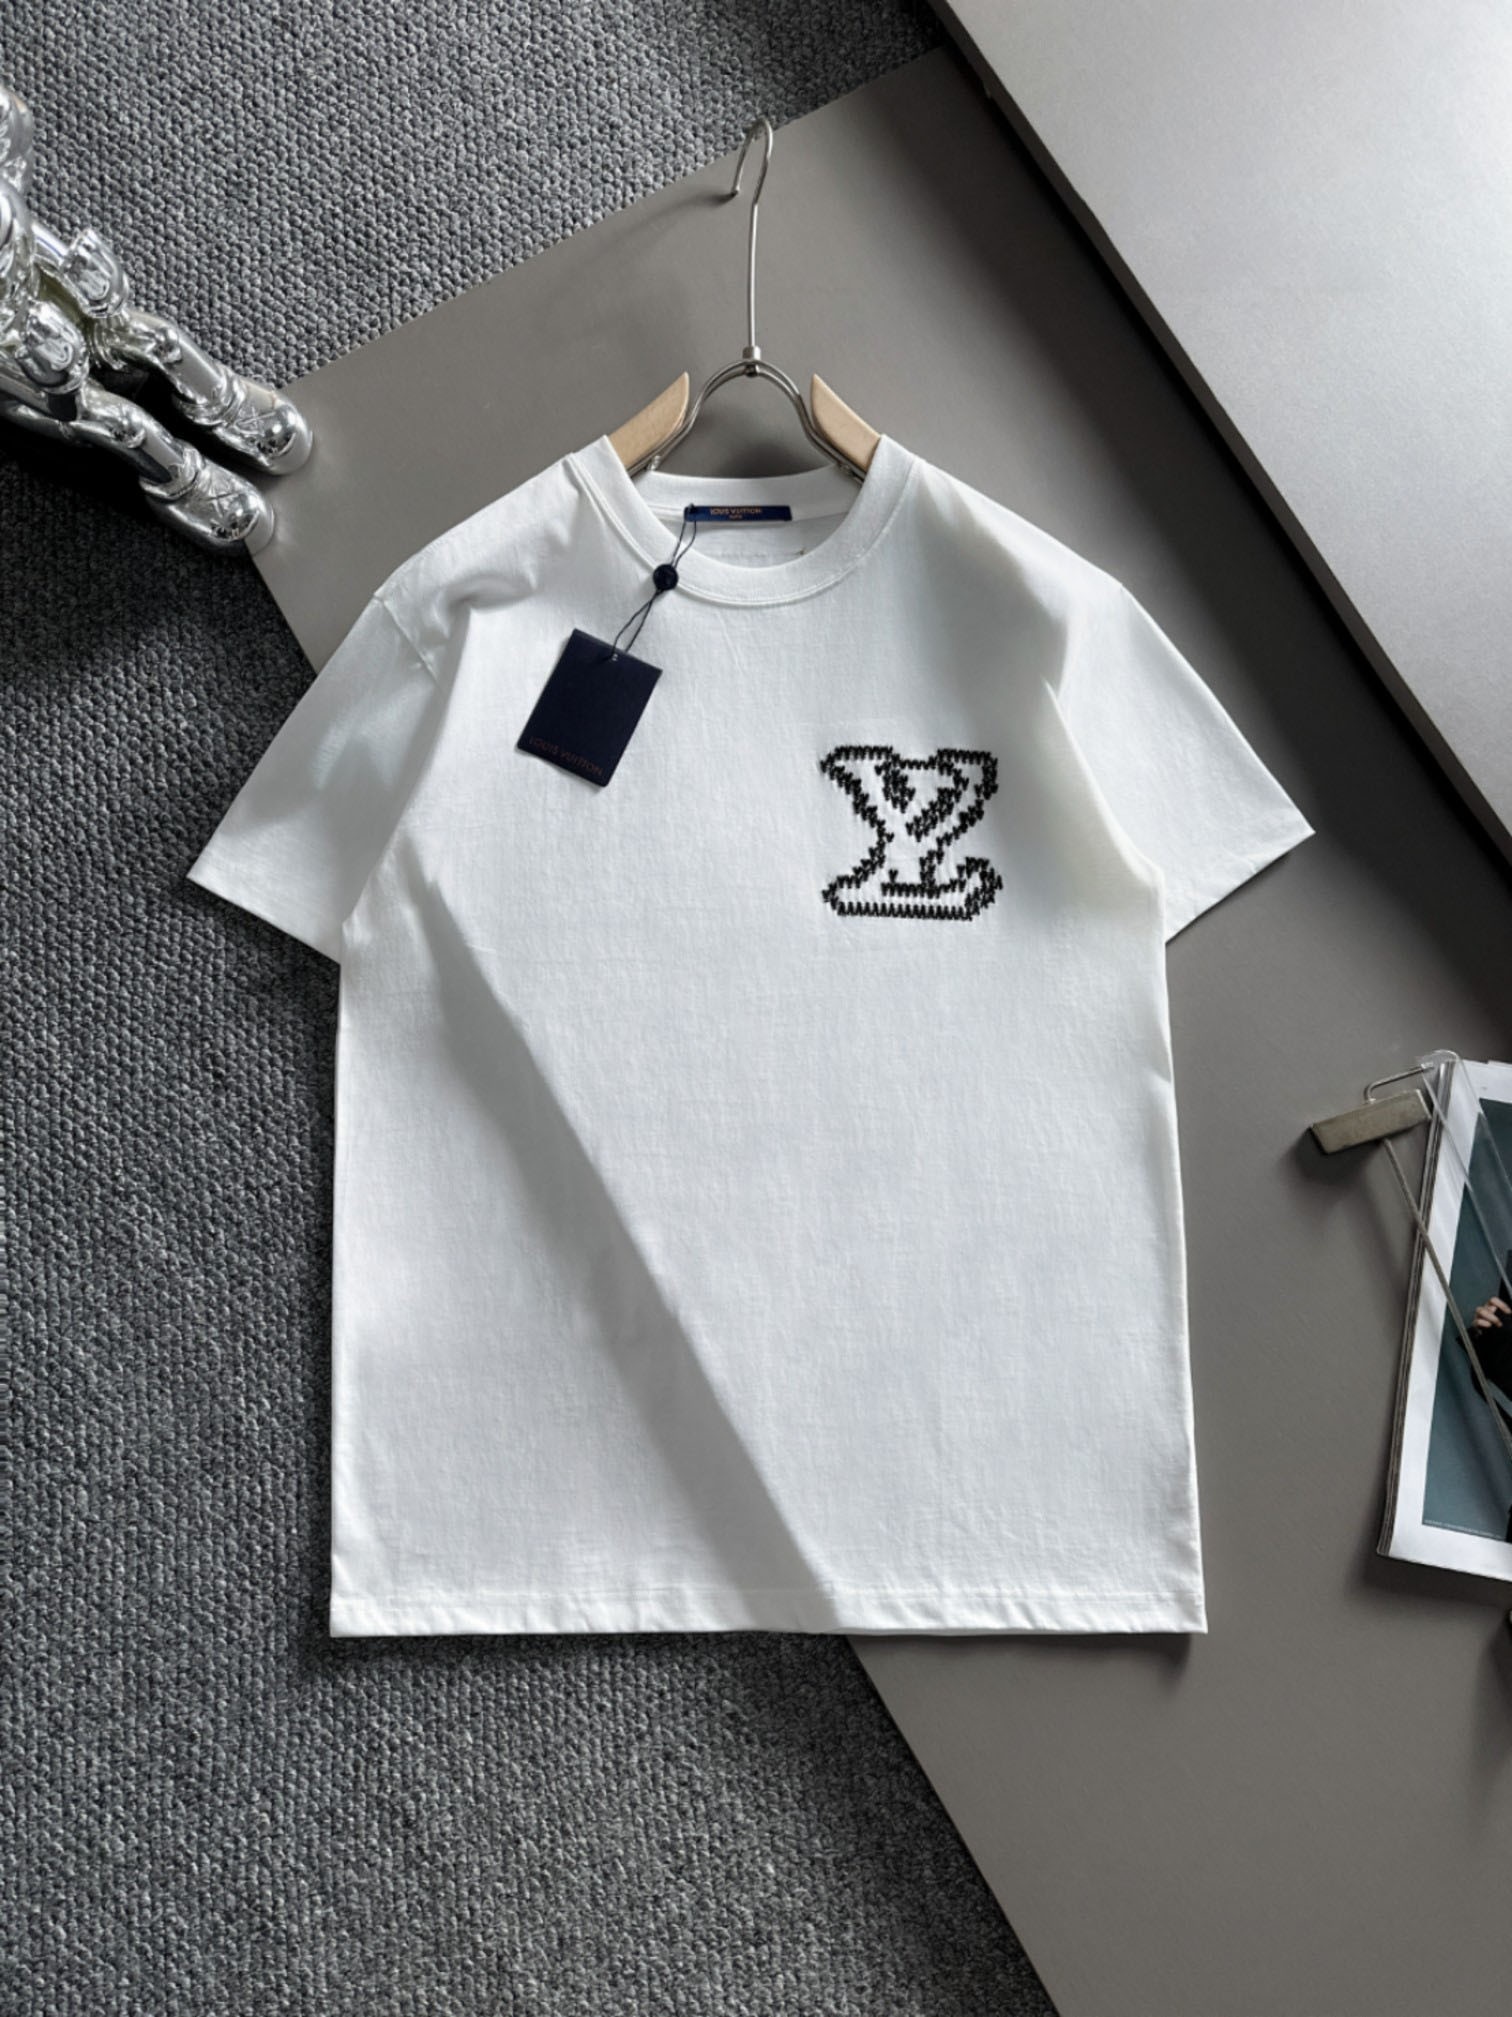 Louis Vuitton Clothing T-Shirt Black White Embroidery Unisex Cotton Knitting Spring/Summer Collection Short Sleeve